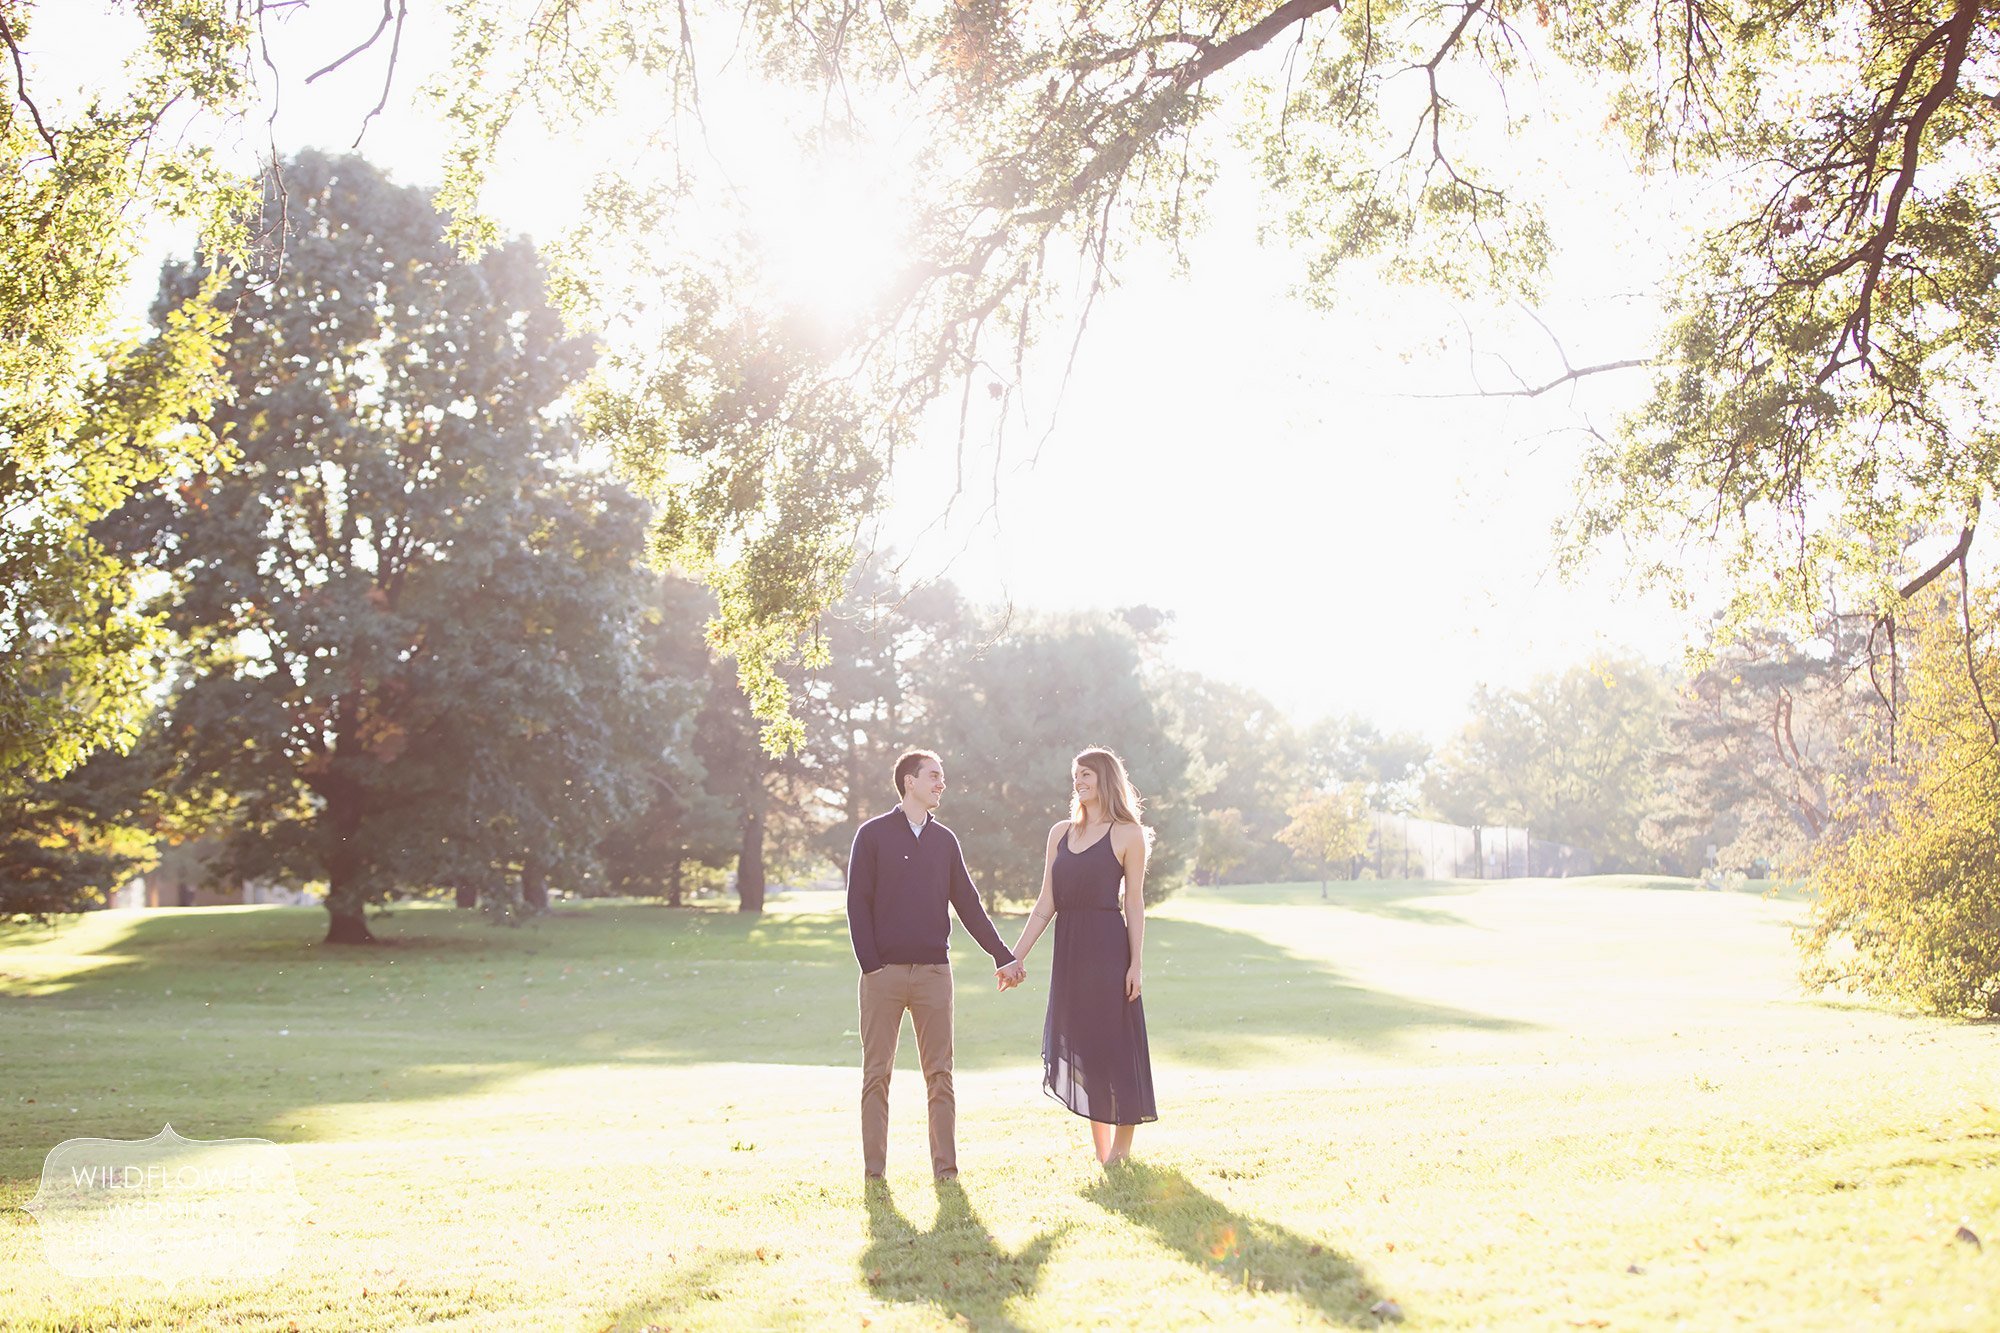 Ethereal engagement photography at sunset with sunbursty light and couple in a field at Loose Park.